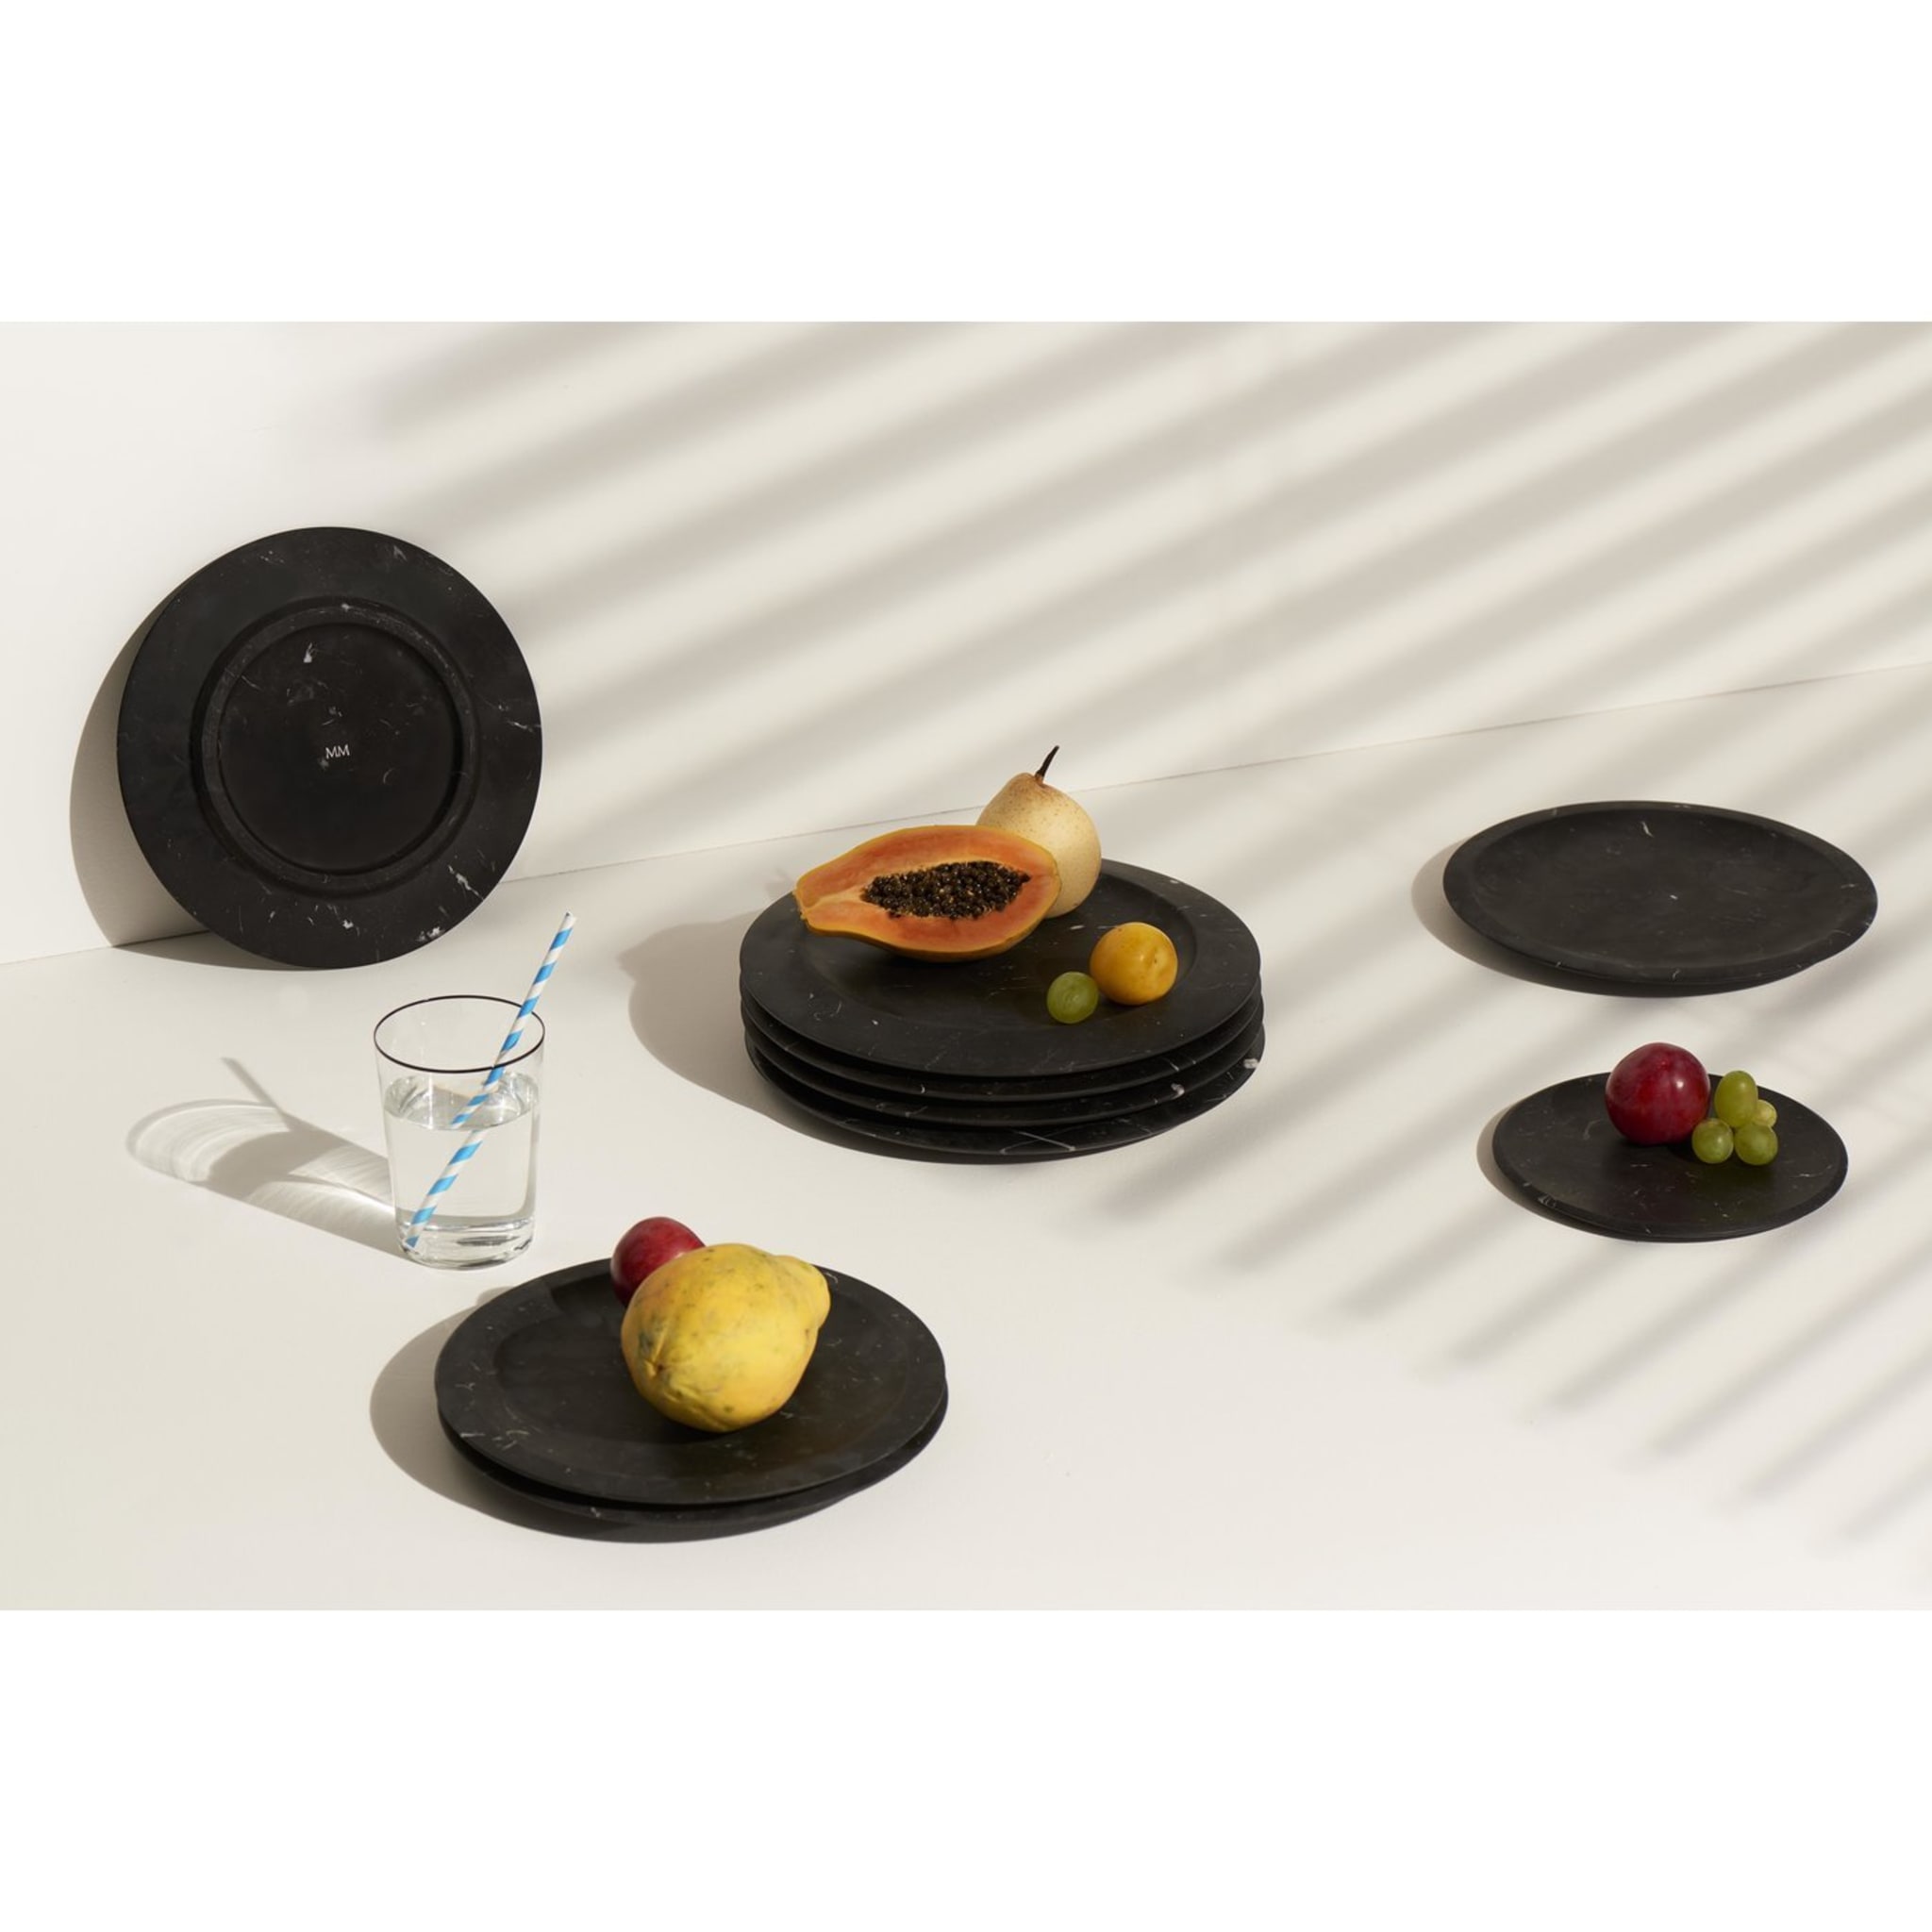 Black Marquina Dinner Plate by Ivan Colominas #1 - Alternative view 1